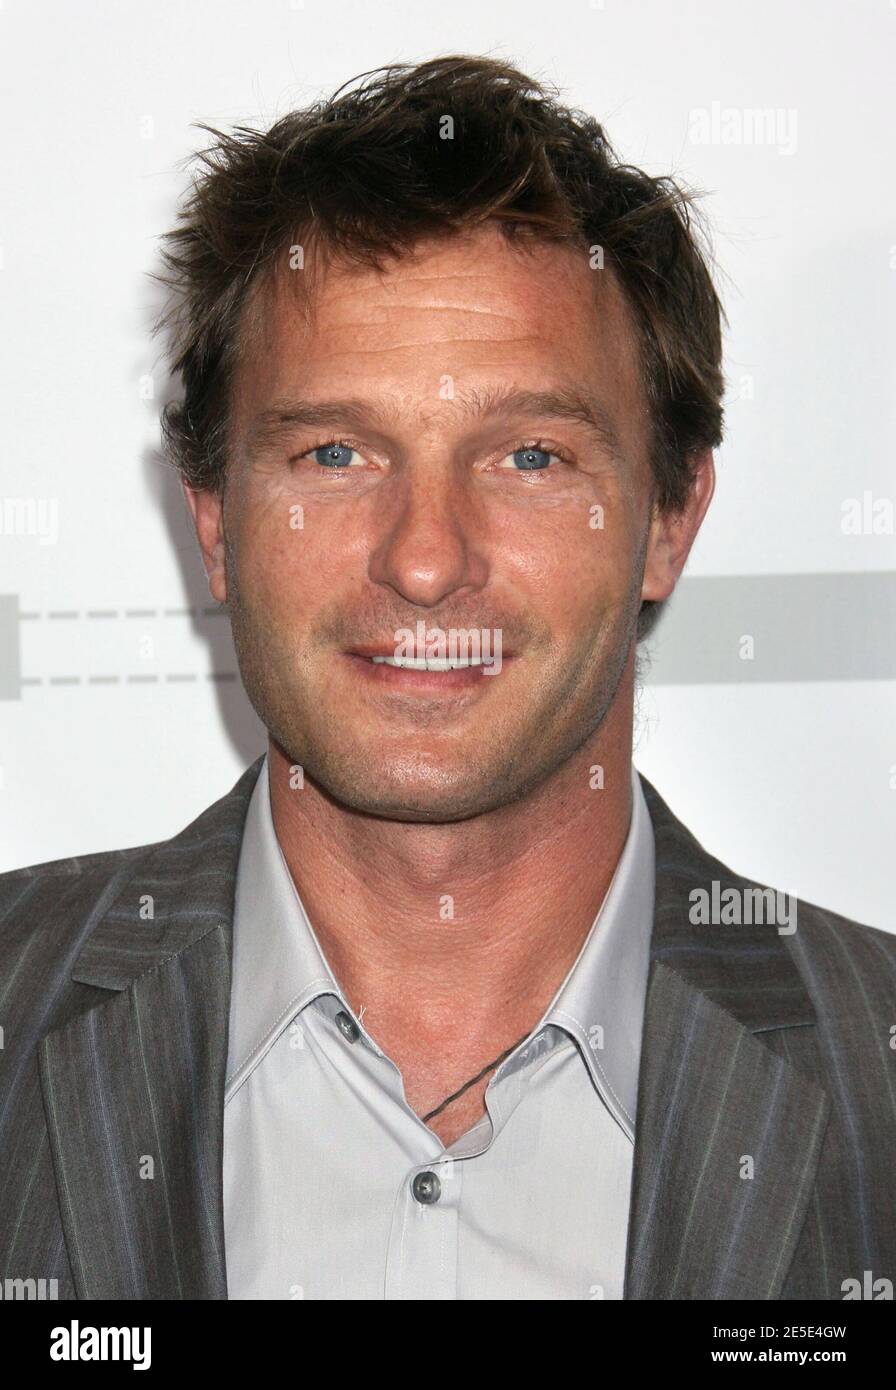 Thomas Kretschmann attending the Premiere of Valkyrie held at The Directors Guild of America in West Hollywood, Los Angeles, CA, USA on December 18, 2008. Photo Baxter/ABACAPRESS.COM Stock Photo